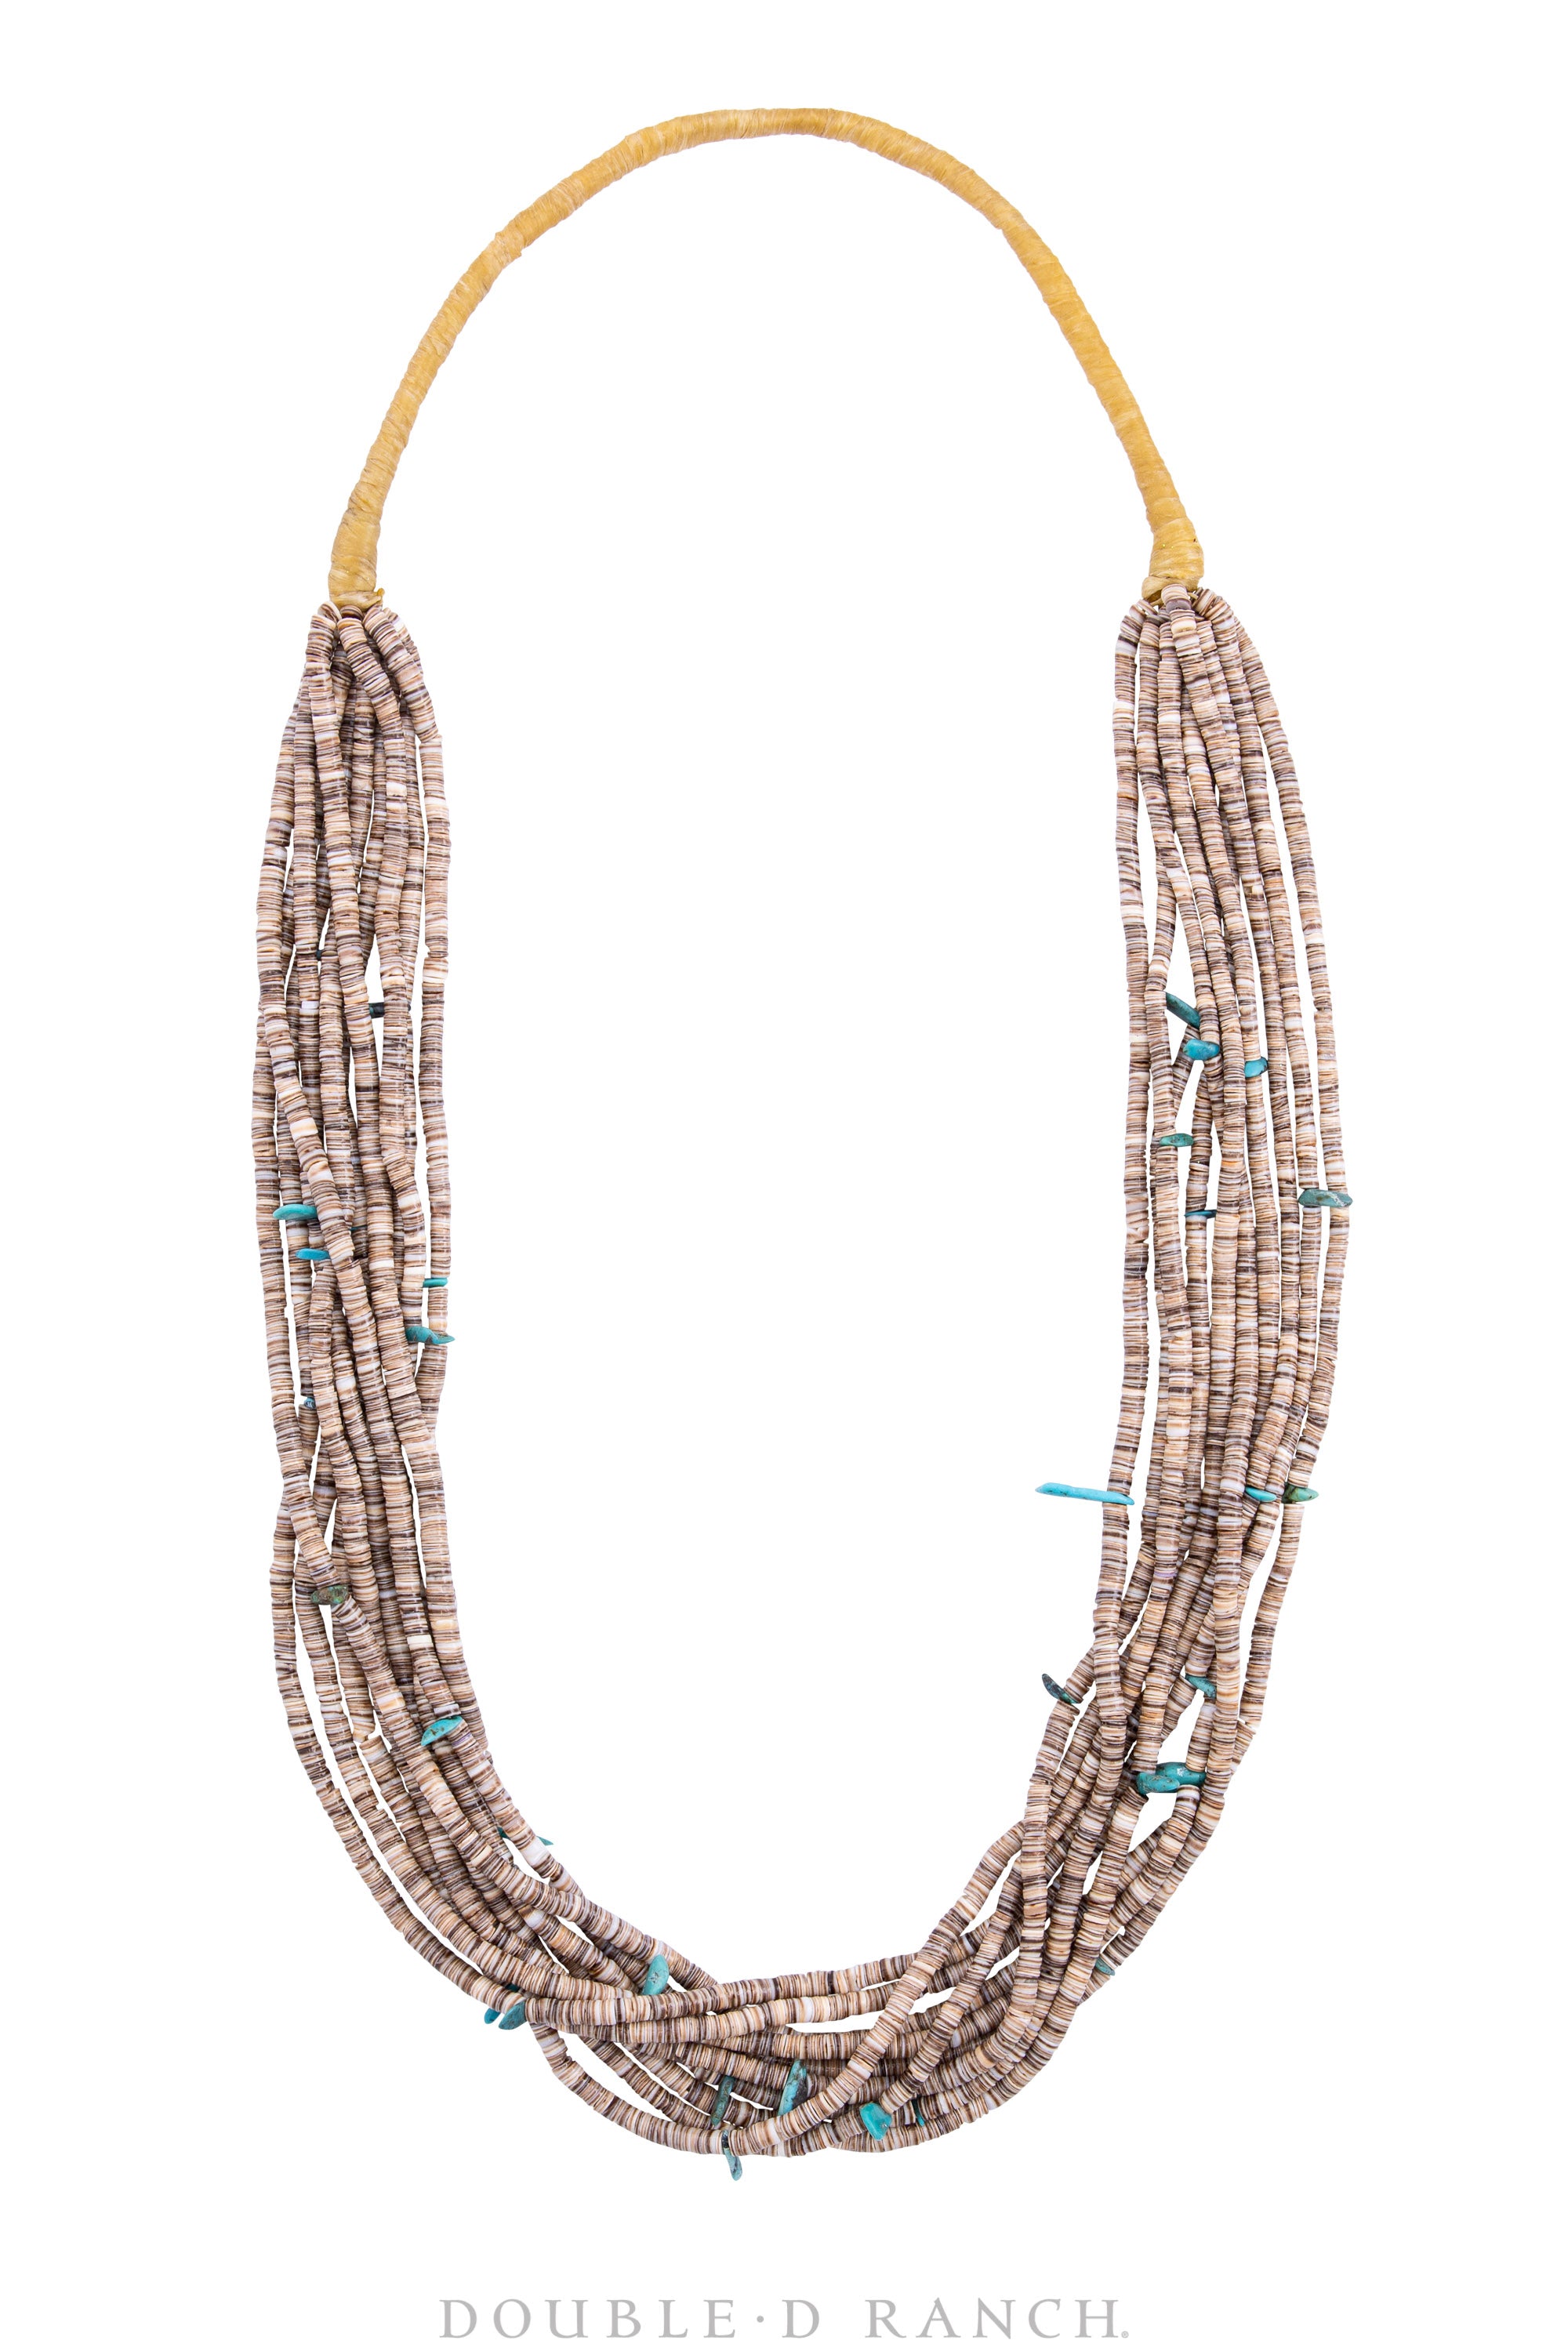 Necklace, Natural Stone, Heishi, 10 Strand, Brown Voluta Shell and Turquoise, Contemporary, 1384